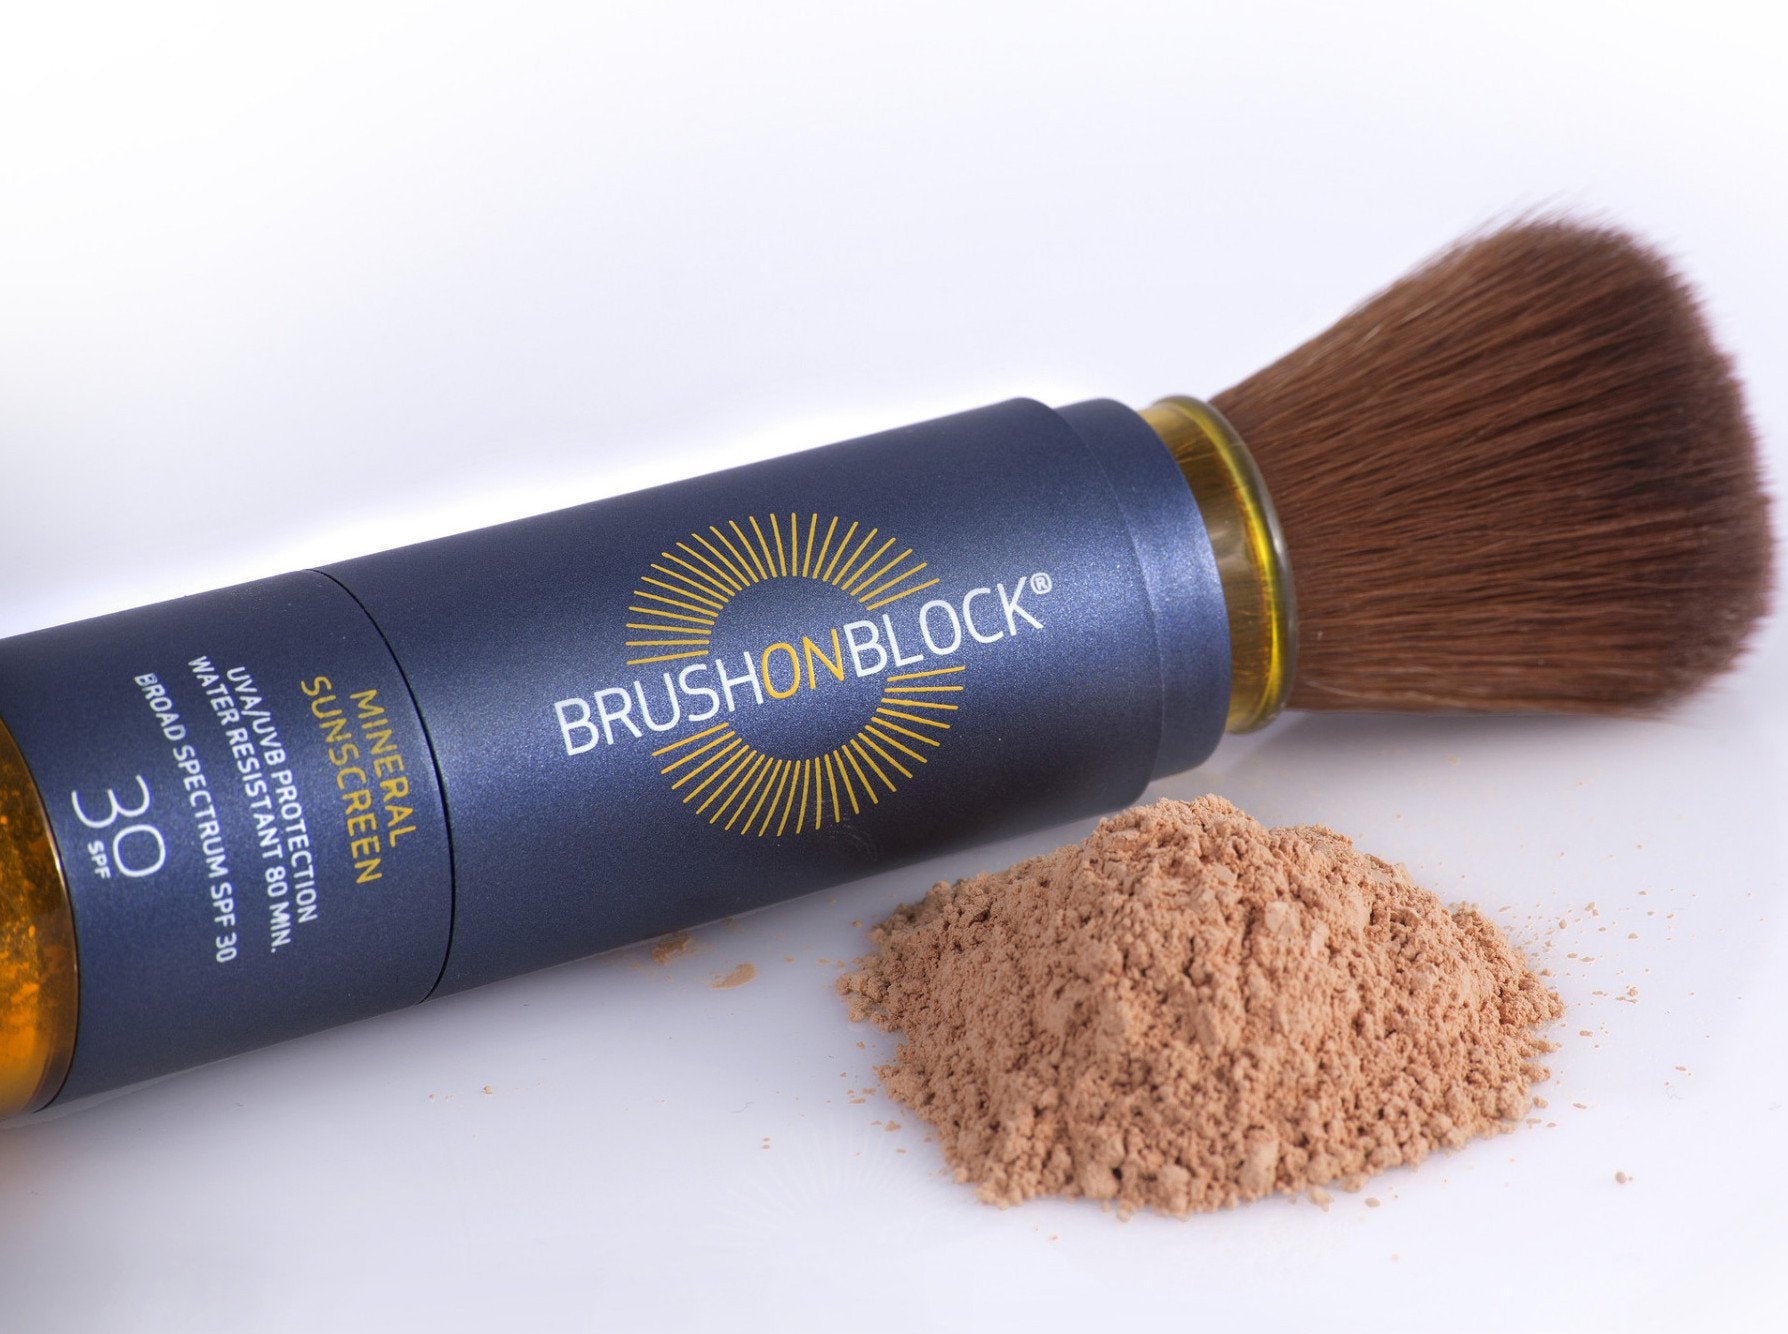 Brush On Block Touch of Tan Broad Spectrum SPF30 Mineral Powder Sunscreen -  h2o closet